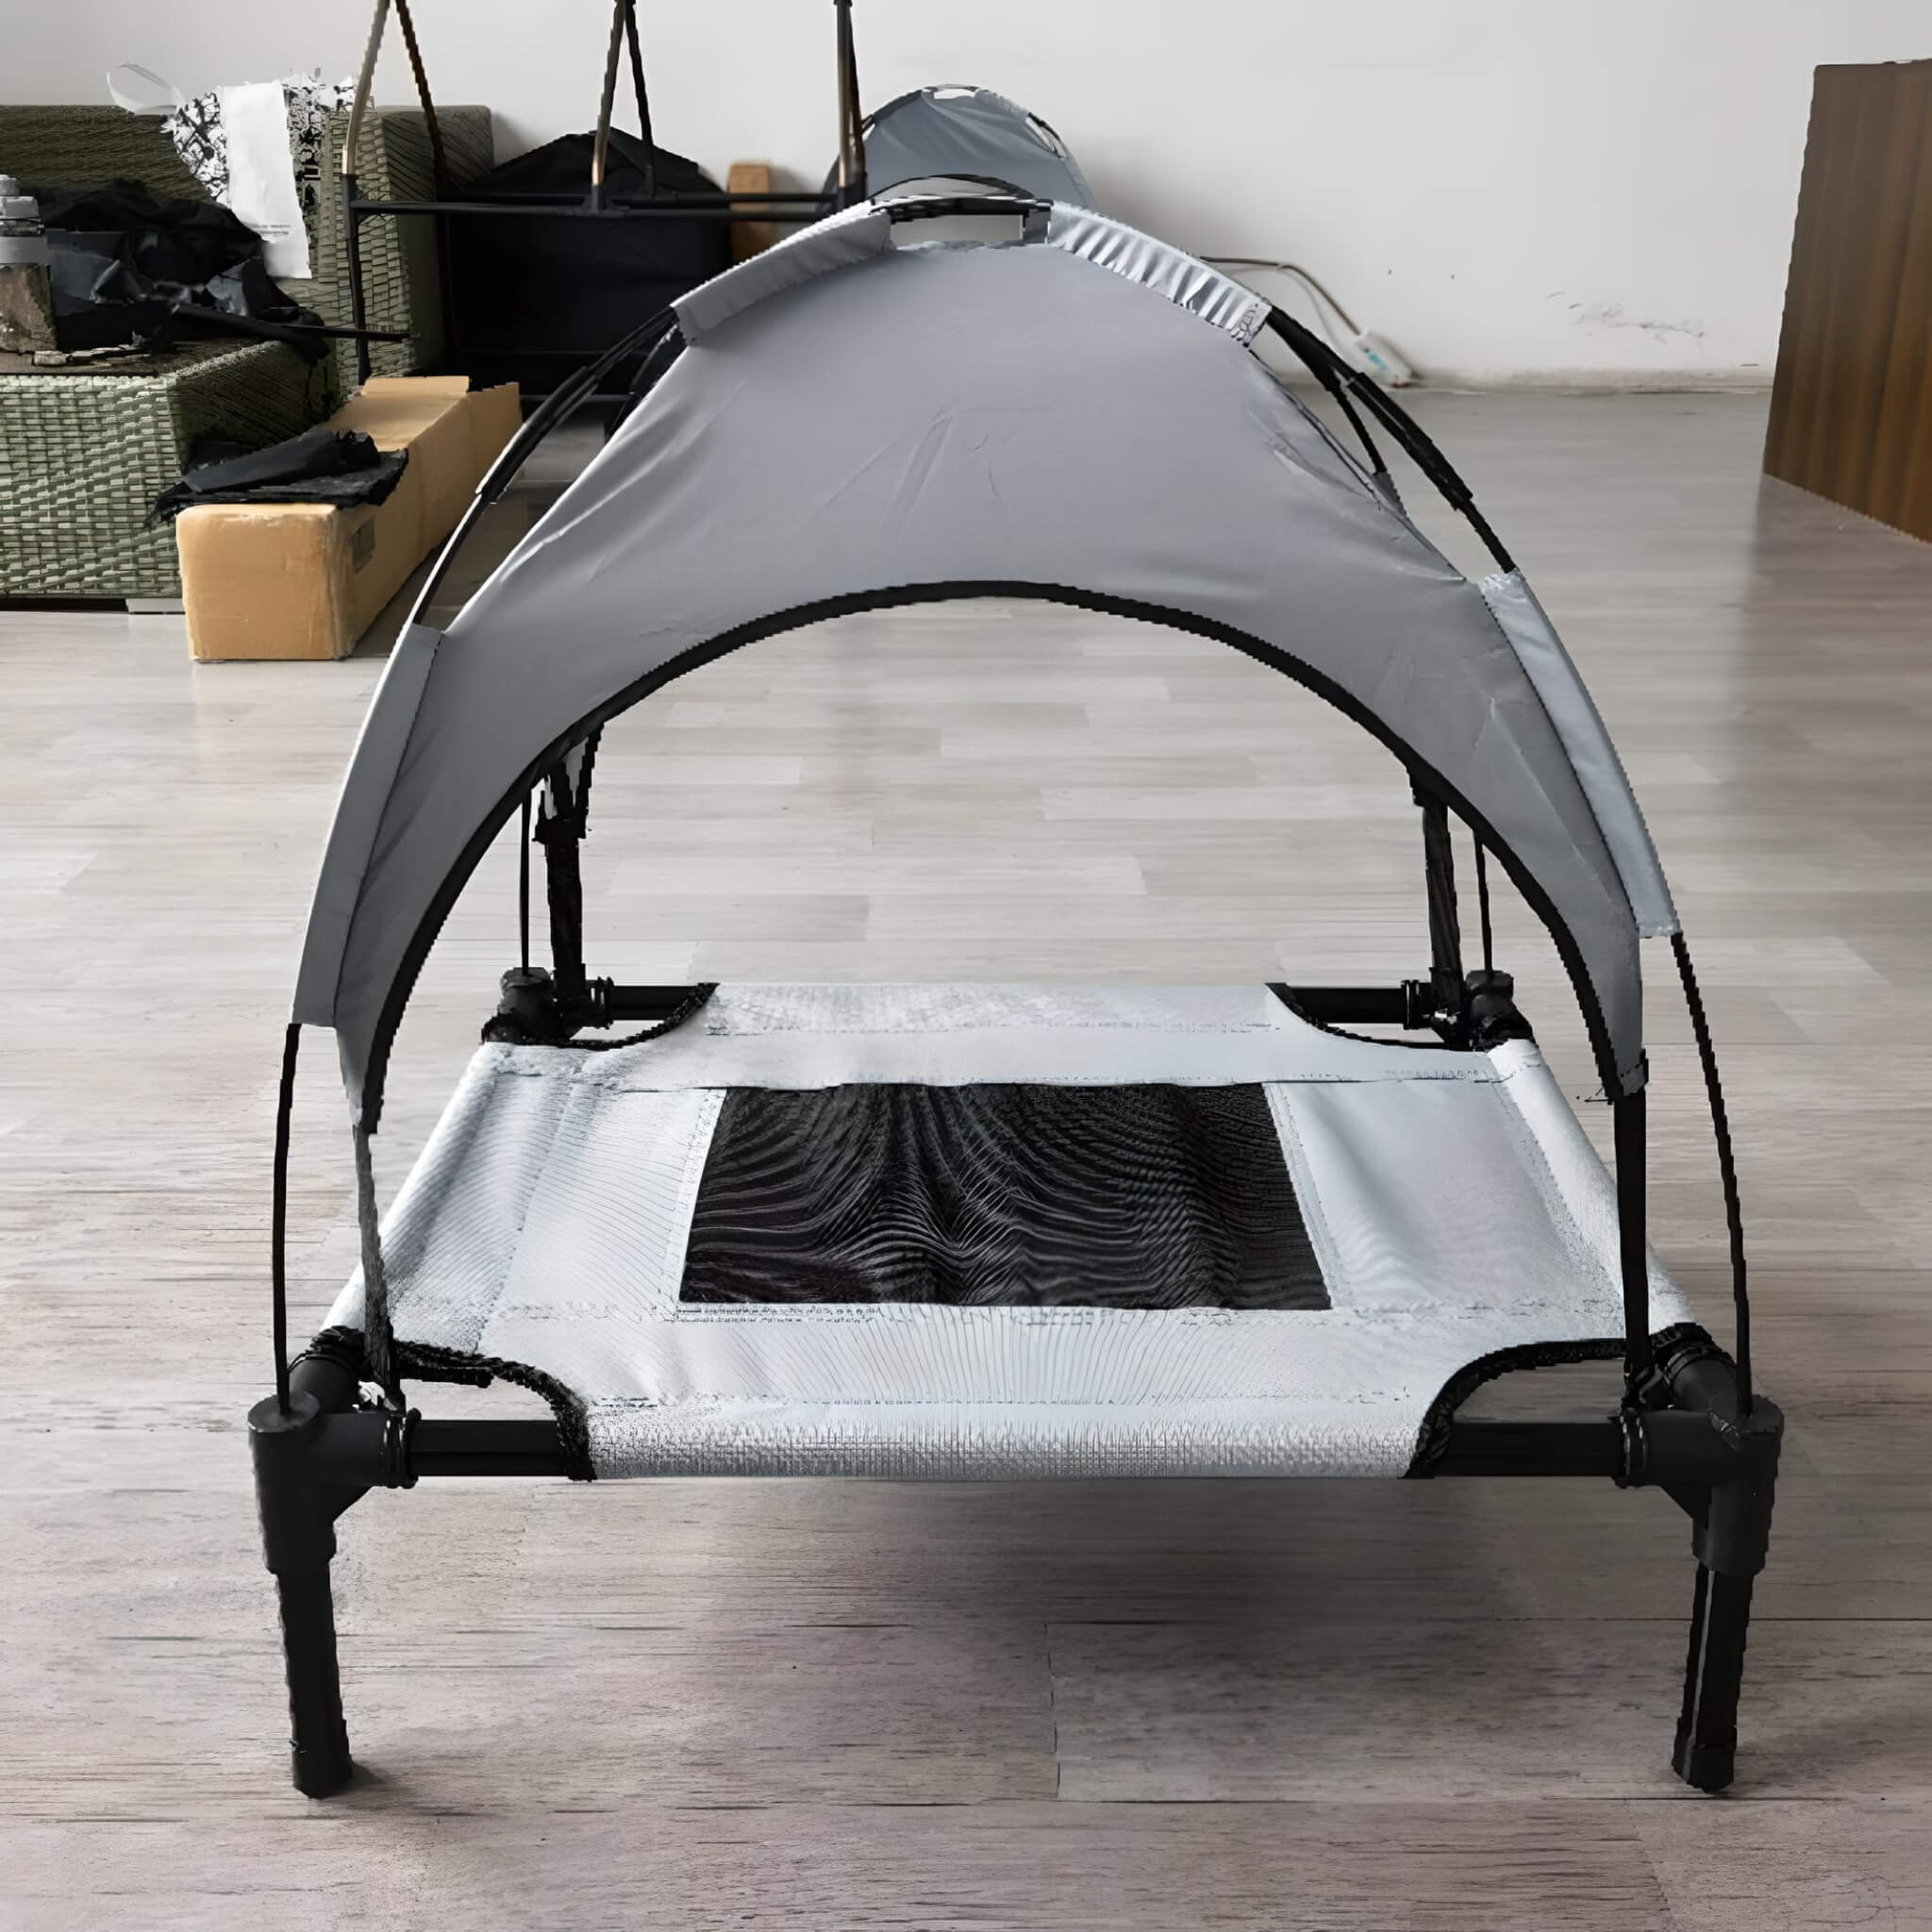 demo-of-dog-cot-with-canopy